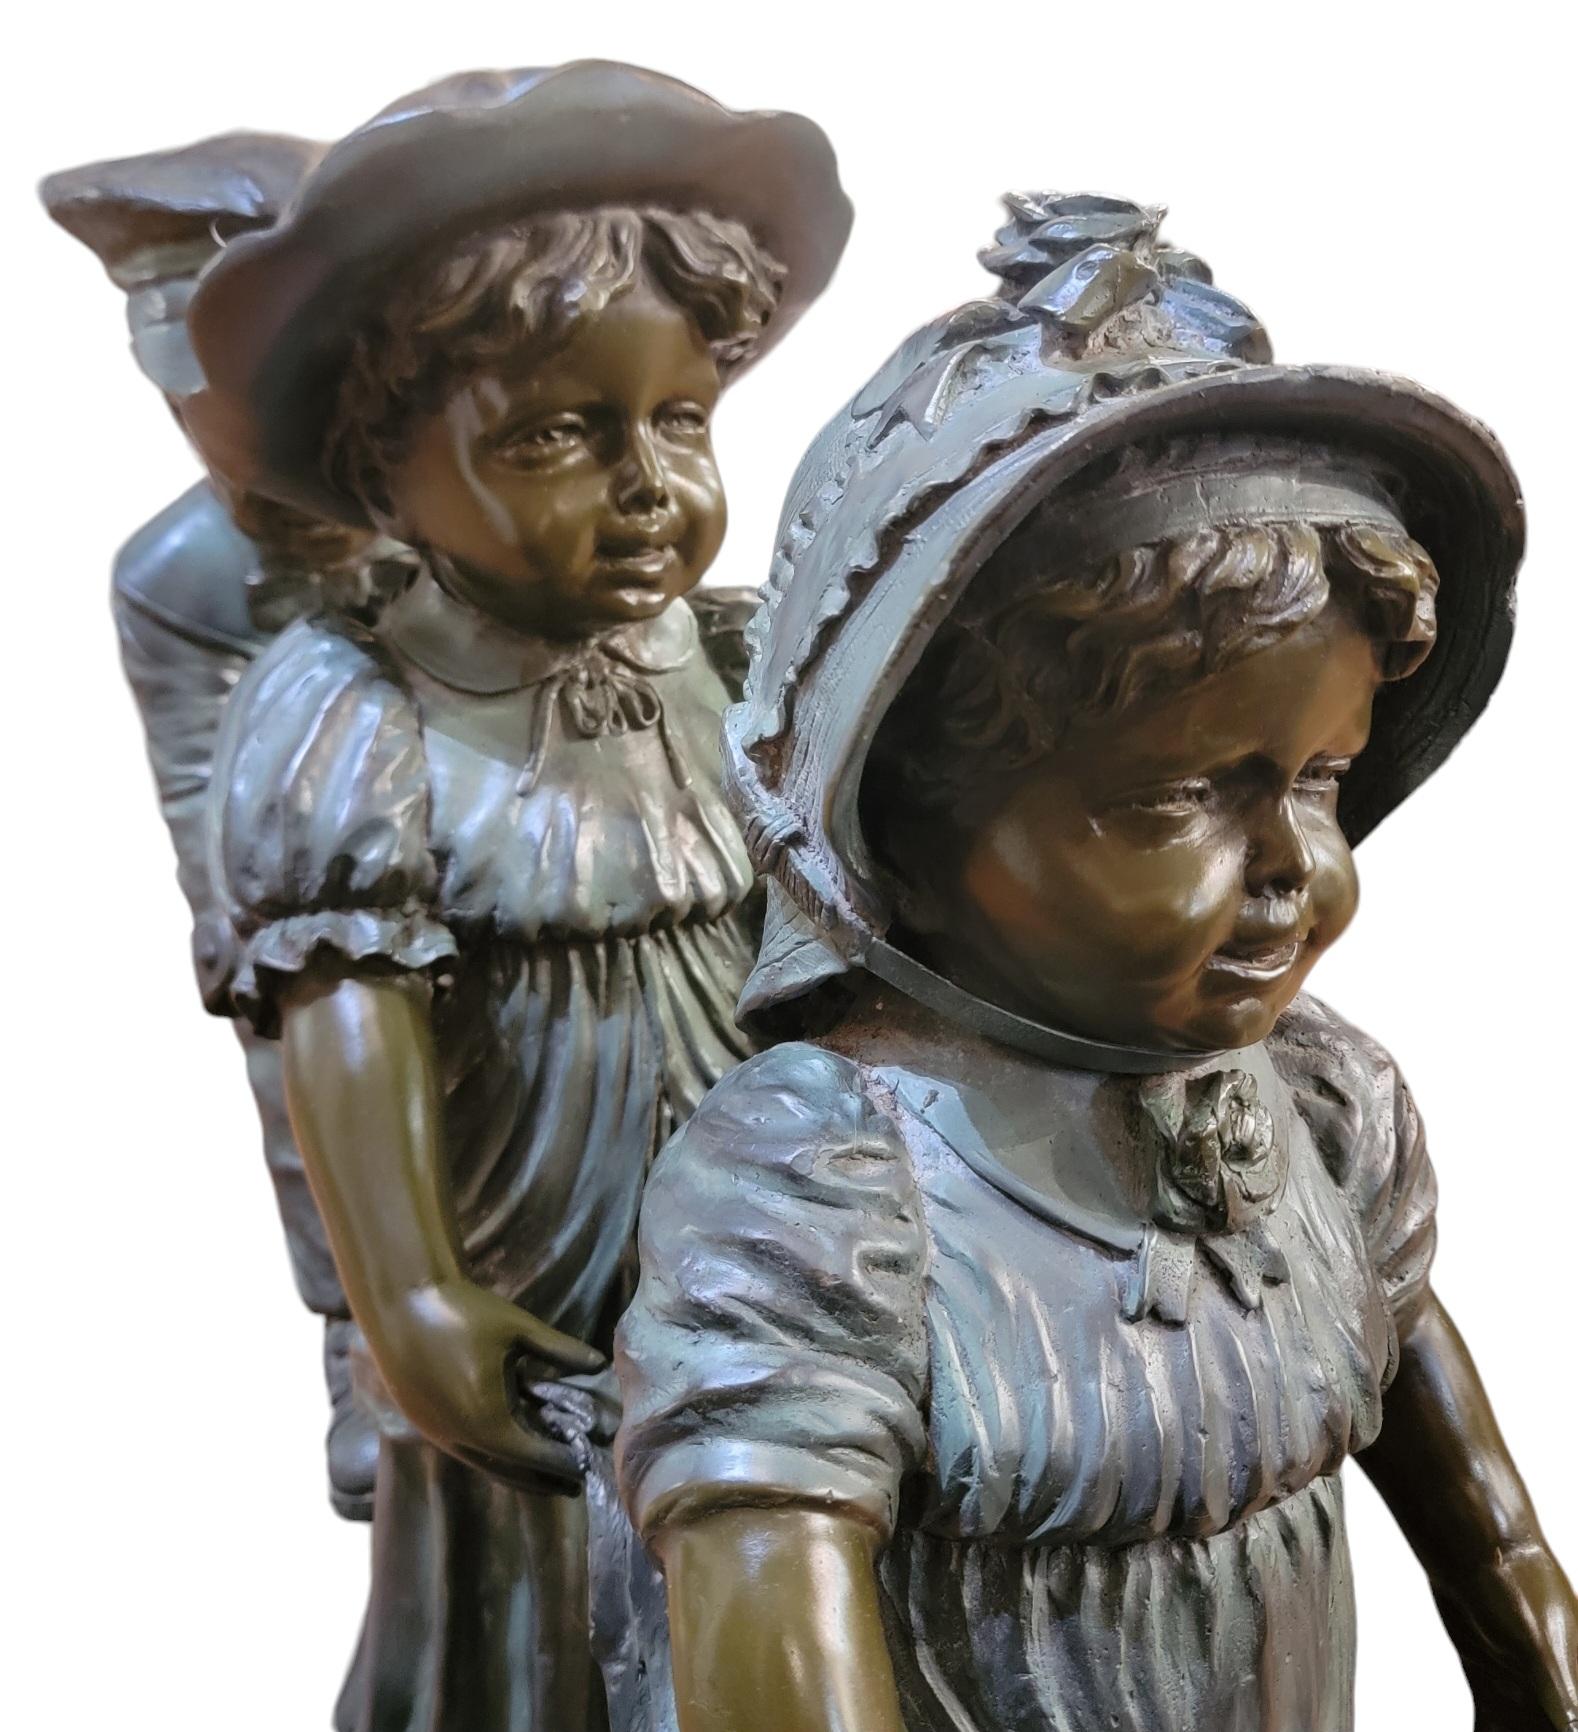 Three Children Playing Statue Signed. This playful sculpture is that of three children on a thick bronze base that is signed. The three children are from smallest to tallest, the smallest one in front. Potentially a wedding scene where the children